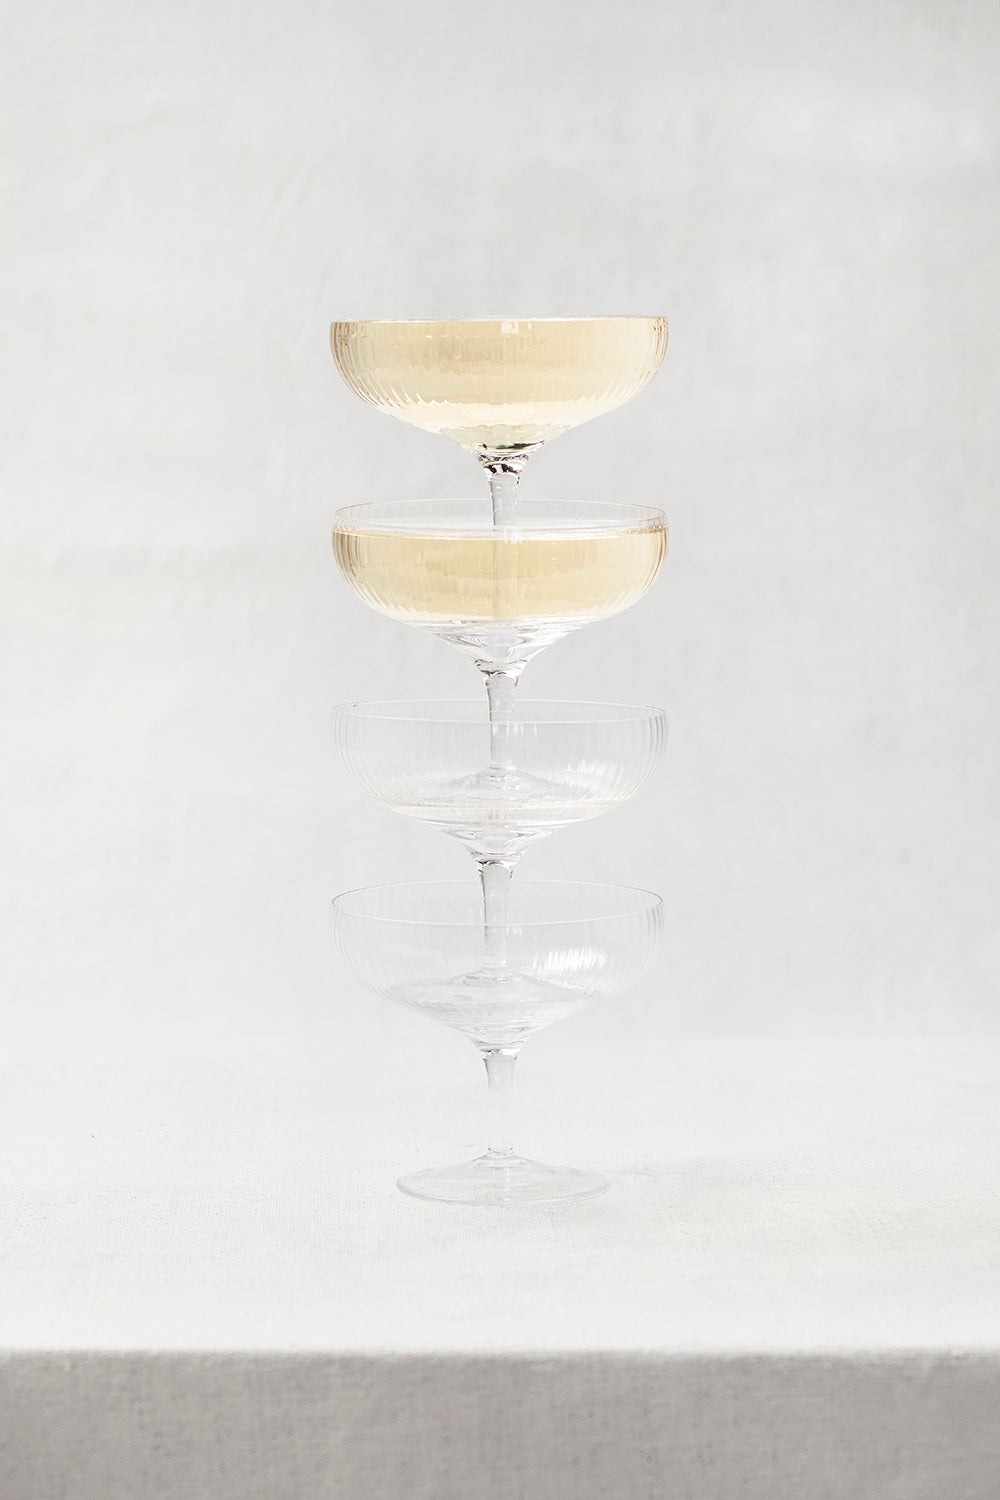 Serax Inku Champagne Coupe (set of 4) by Serax. Stacked full champagne glasses.